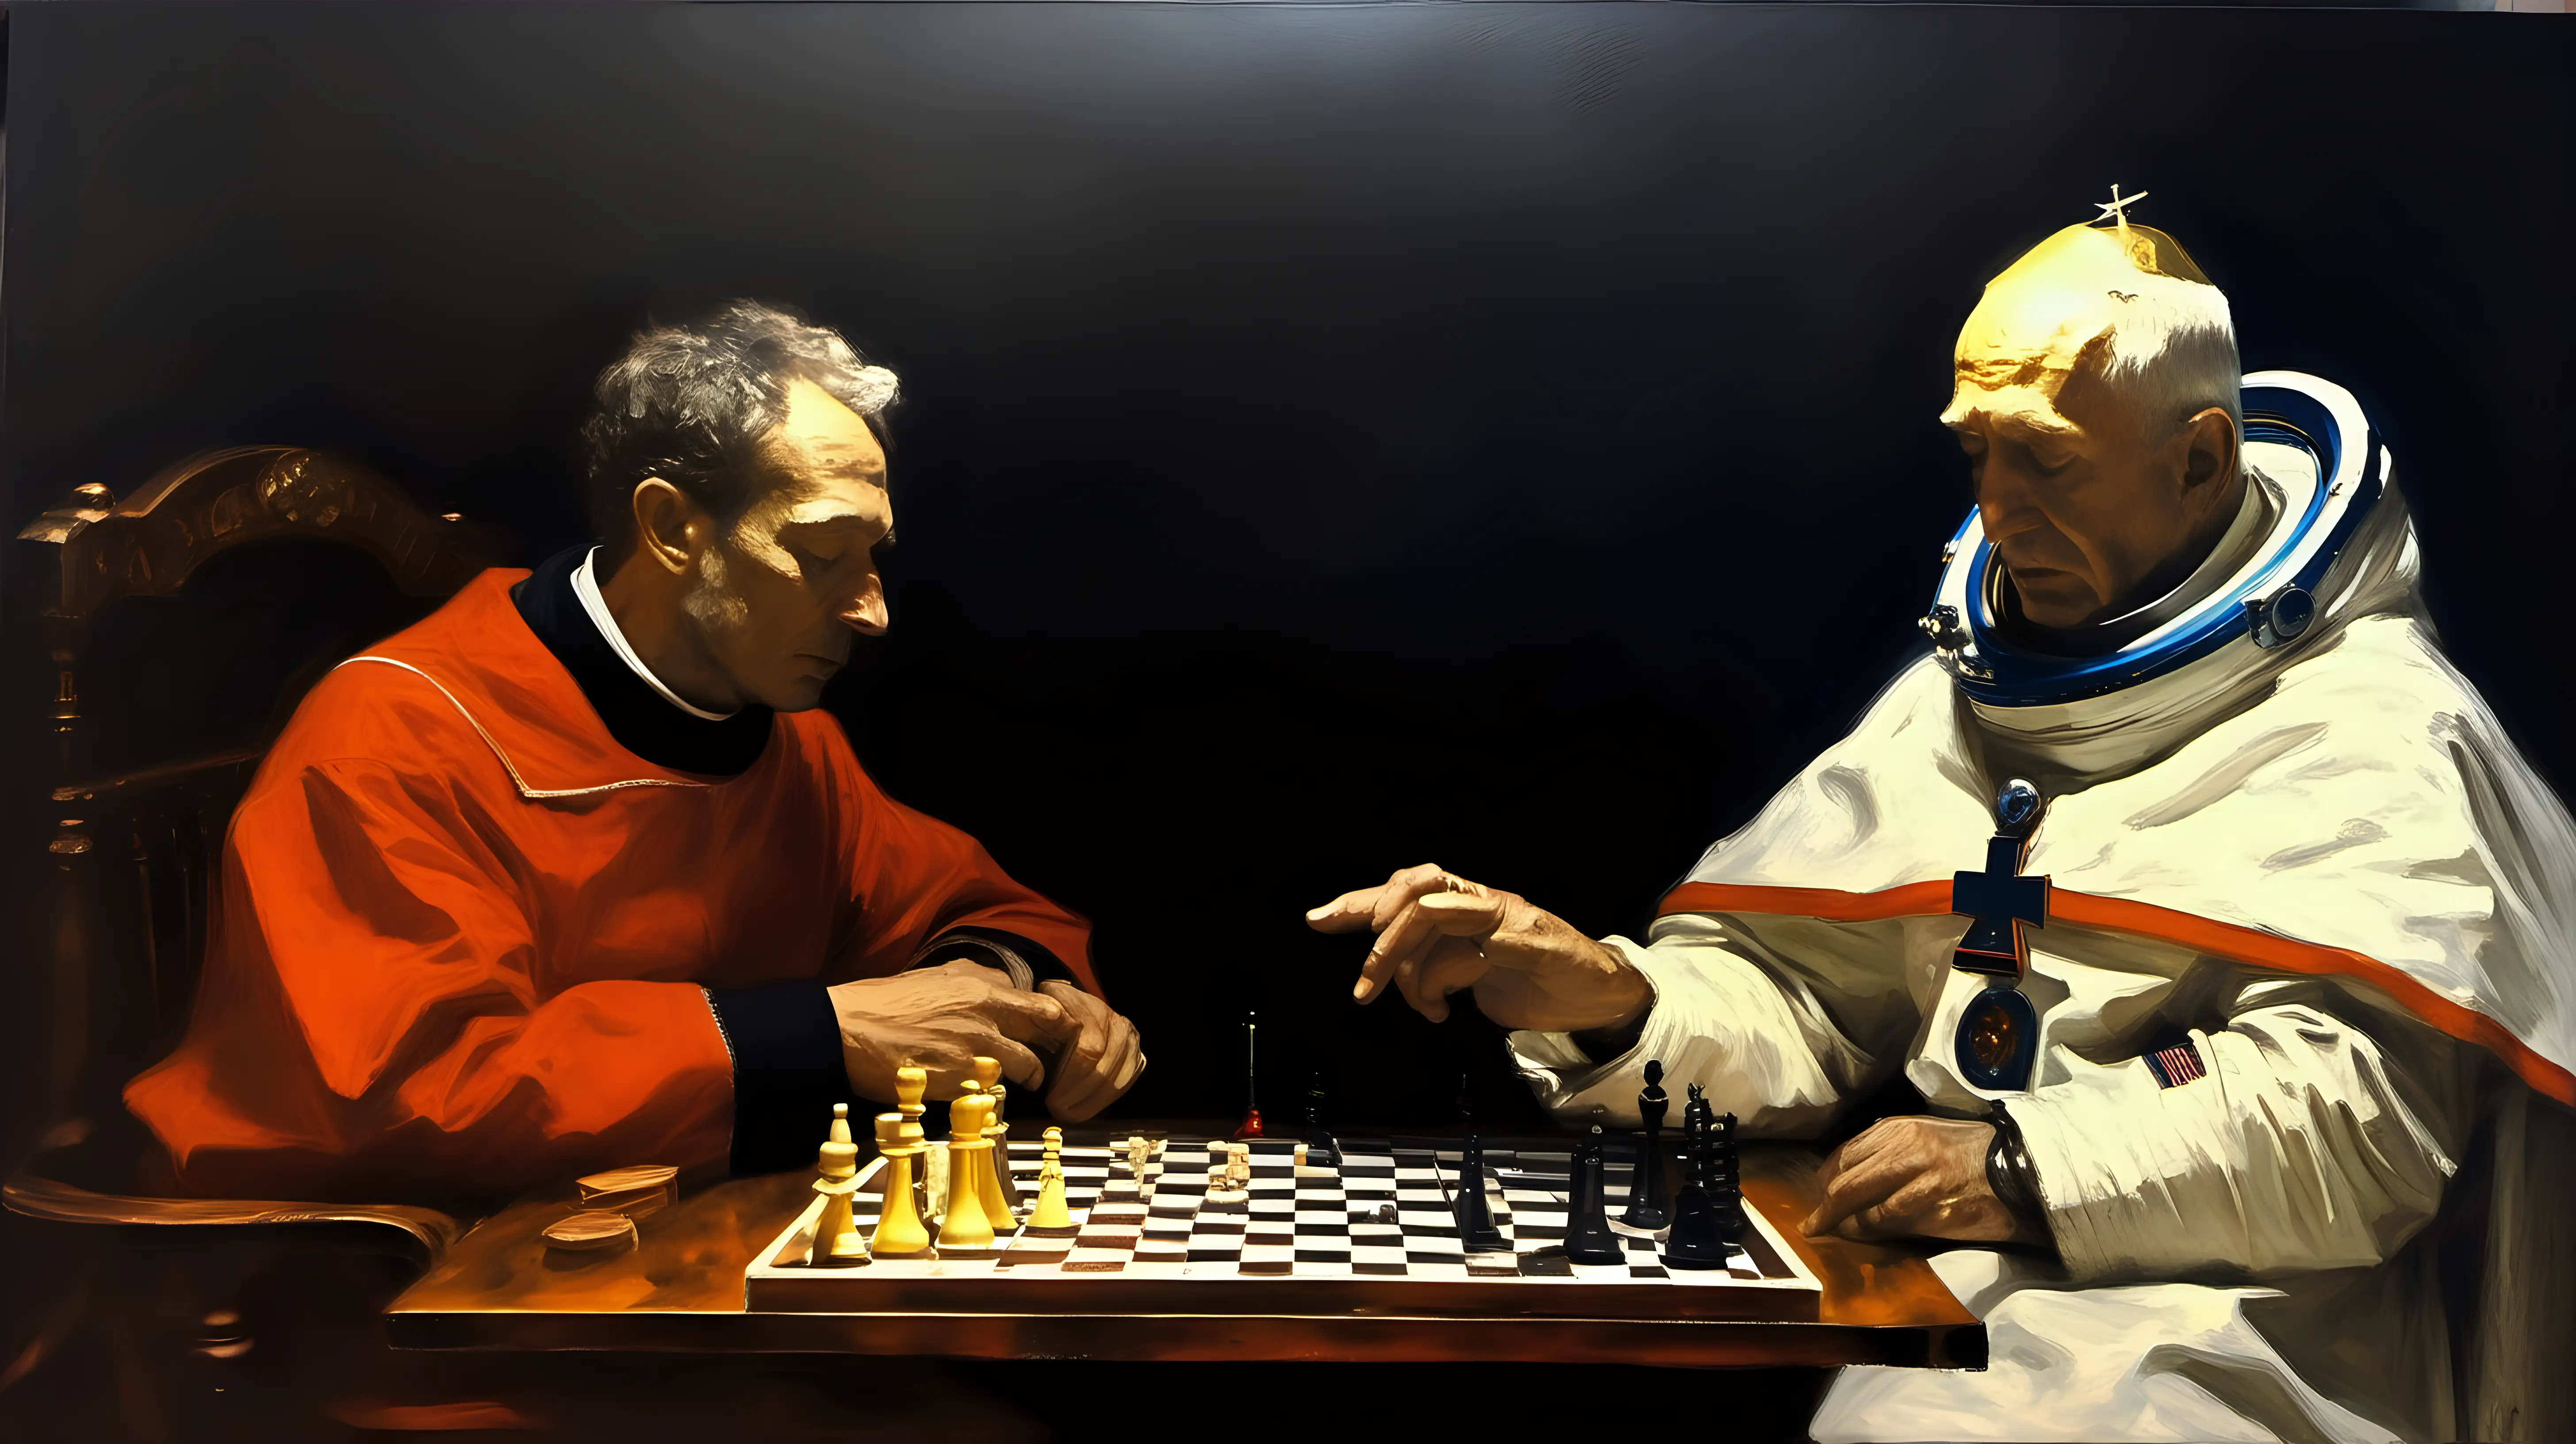 astronaut and priest playing chess, oil on canvas, old picture, Ilya Repin style